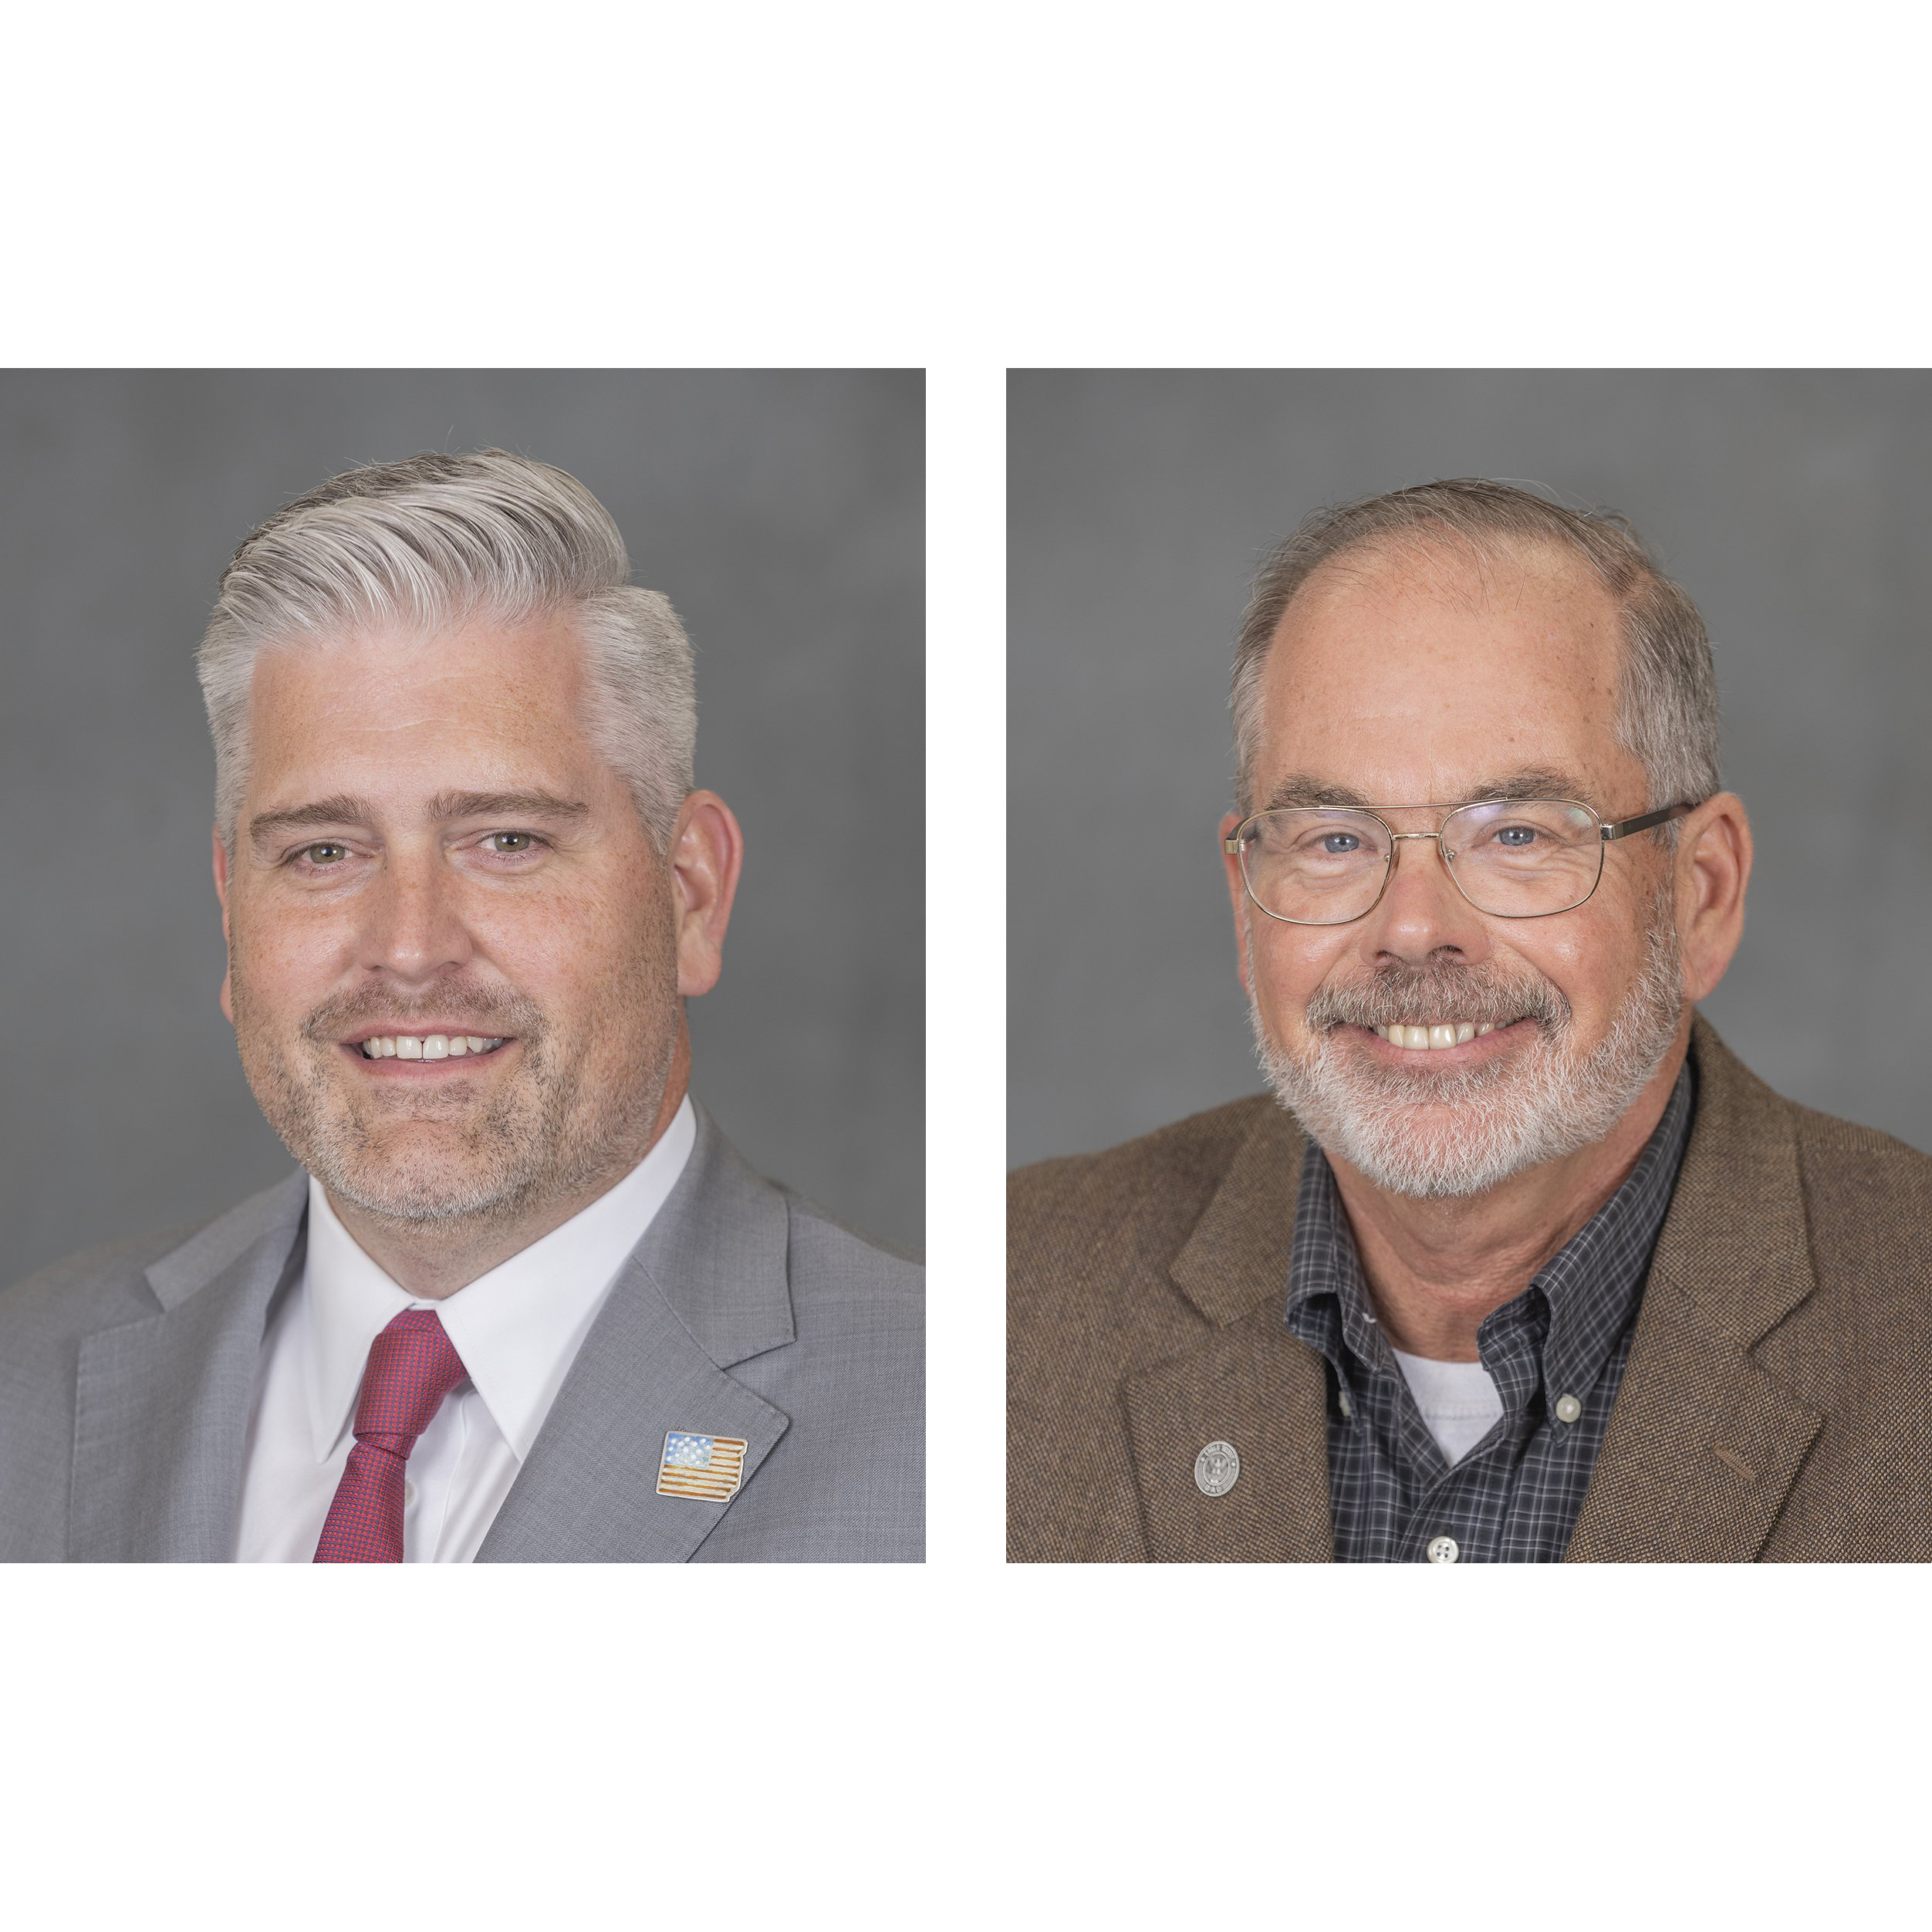 Arkansas District 7 Republican Candidates on Why They Should be Elected